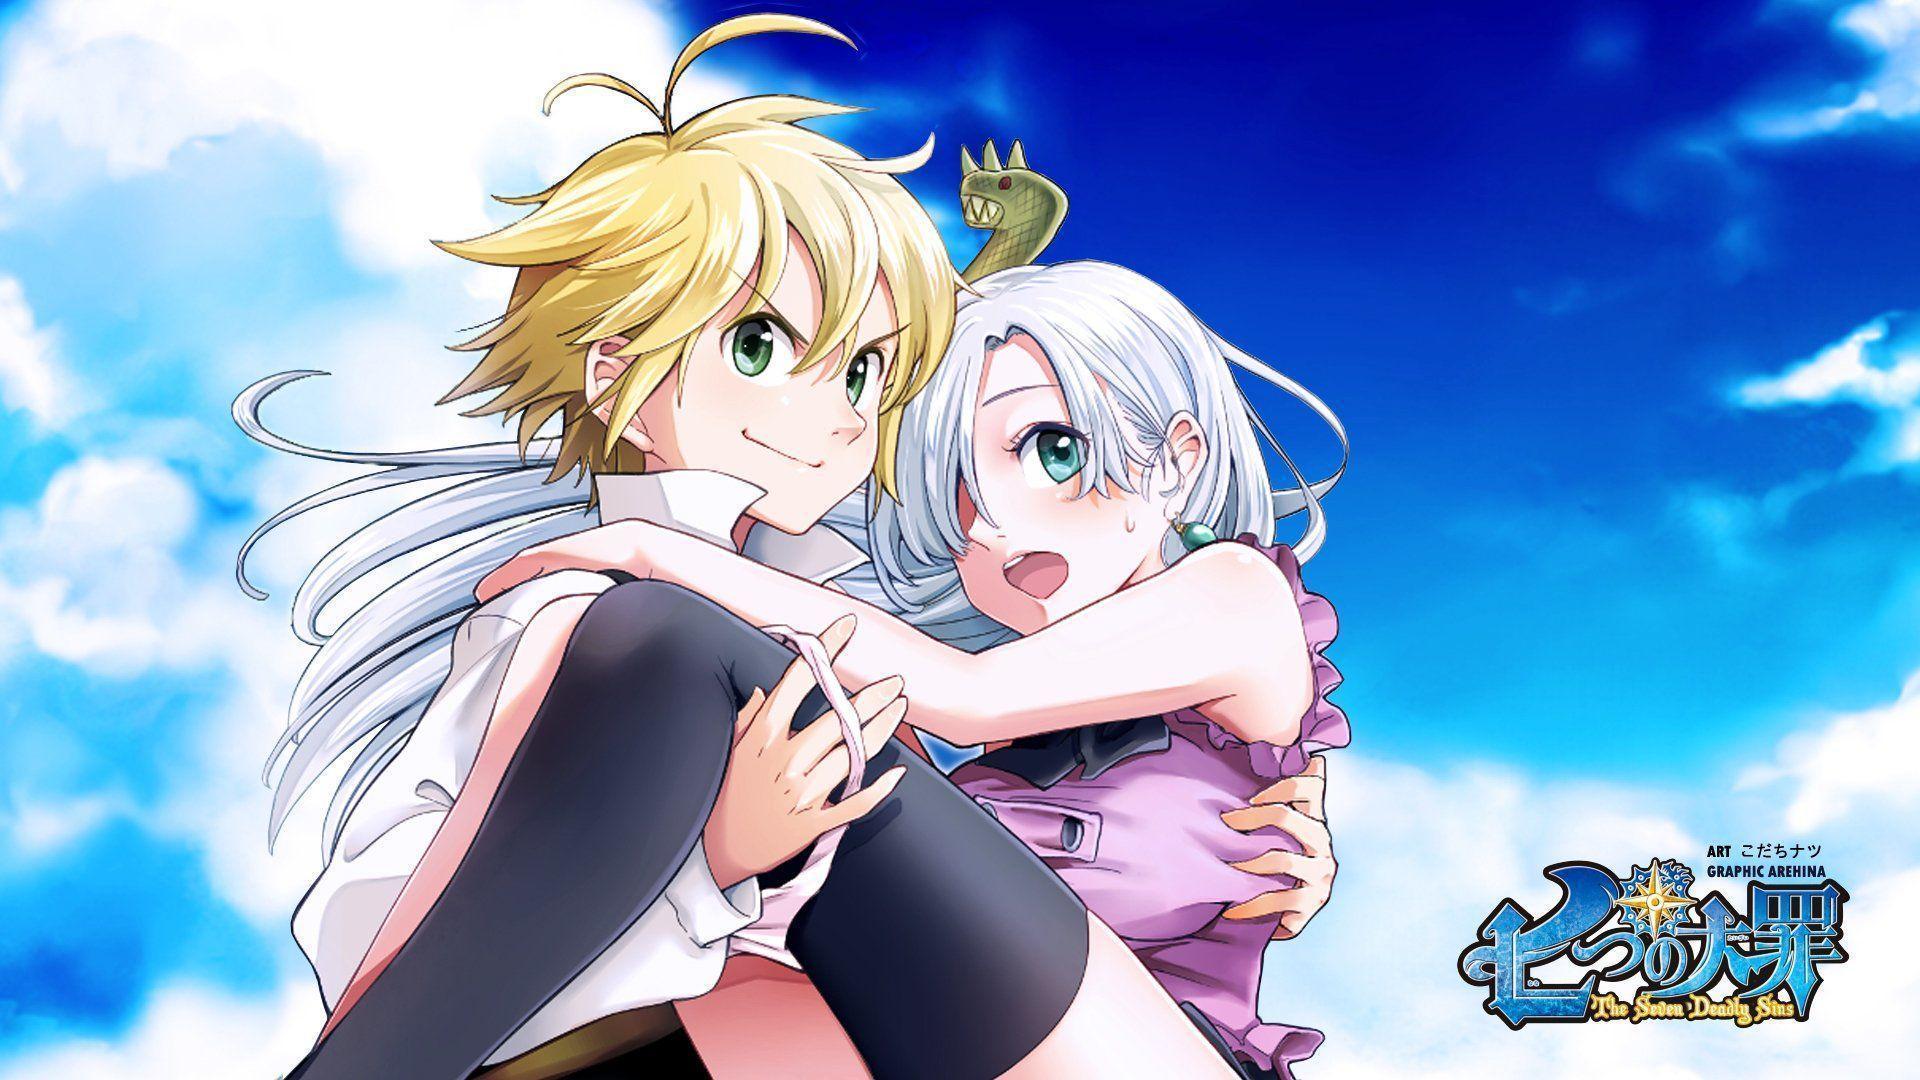 The Seven Deadly Sins Hd Wallpapers For Laptop, The Seven Deadly Sins, Anime